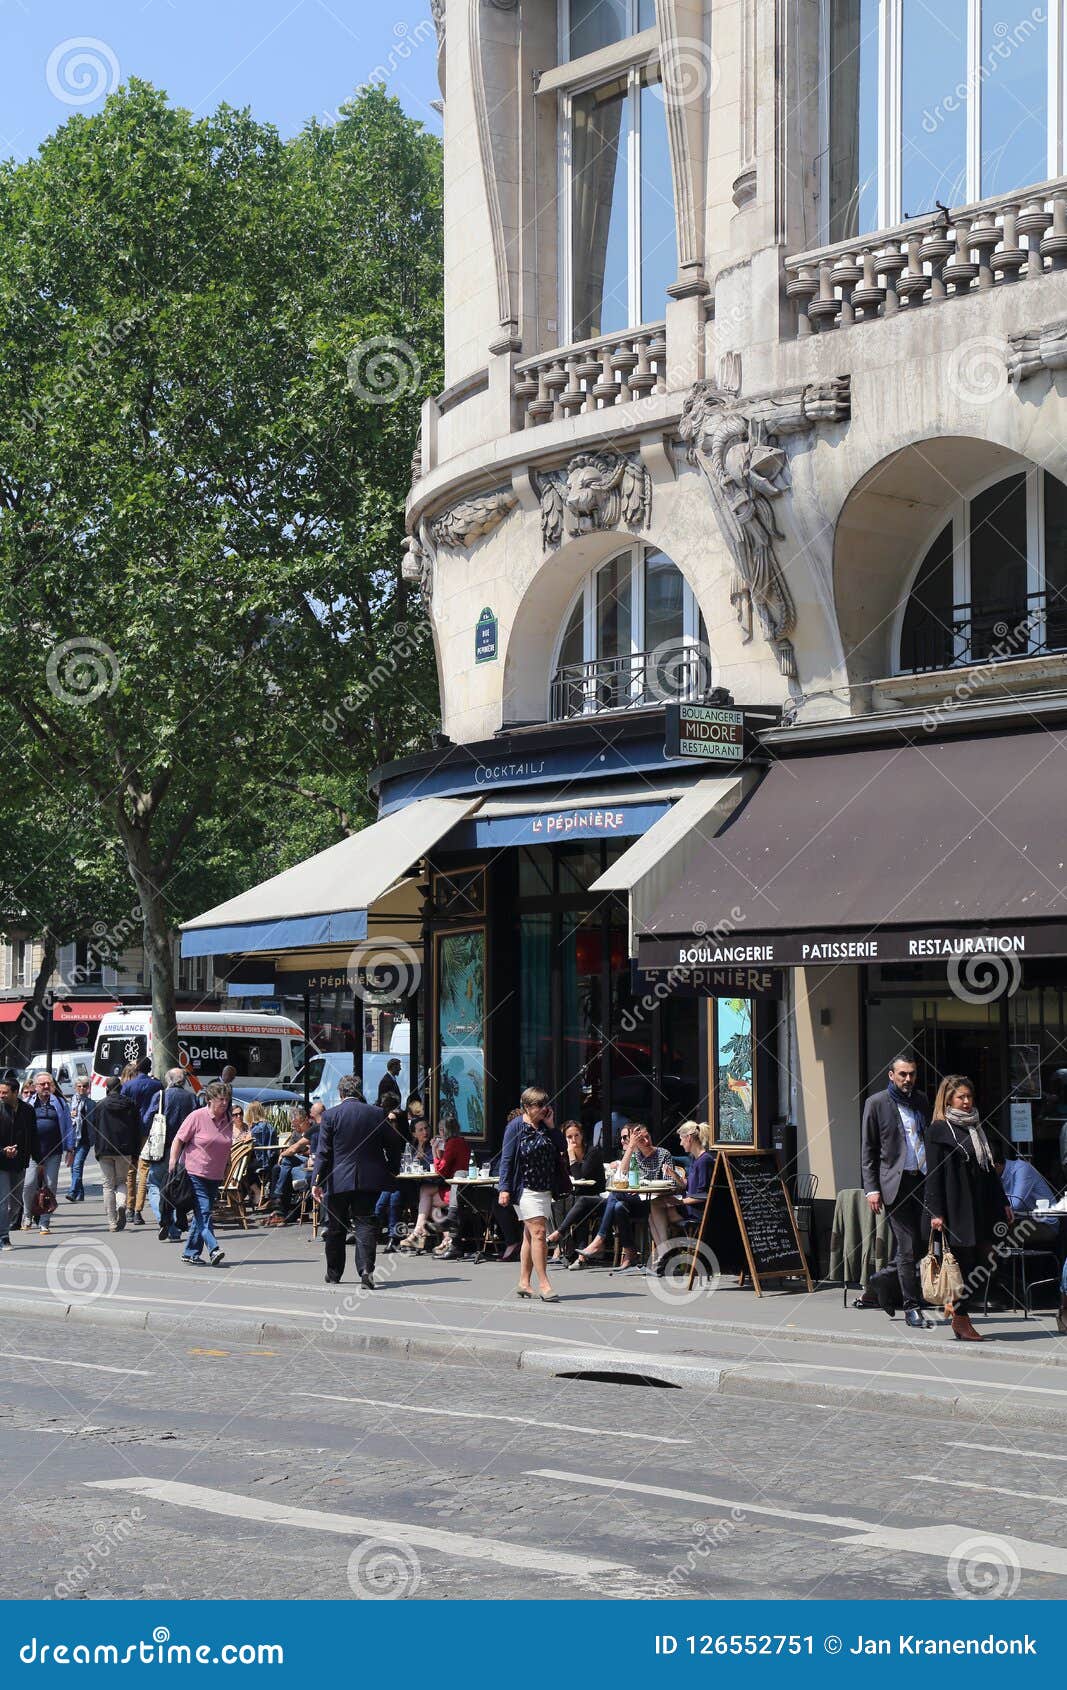  Sidewalk  Cafe  In Paris  France  Editorial Photo Image of 